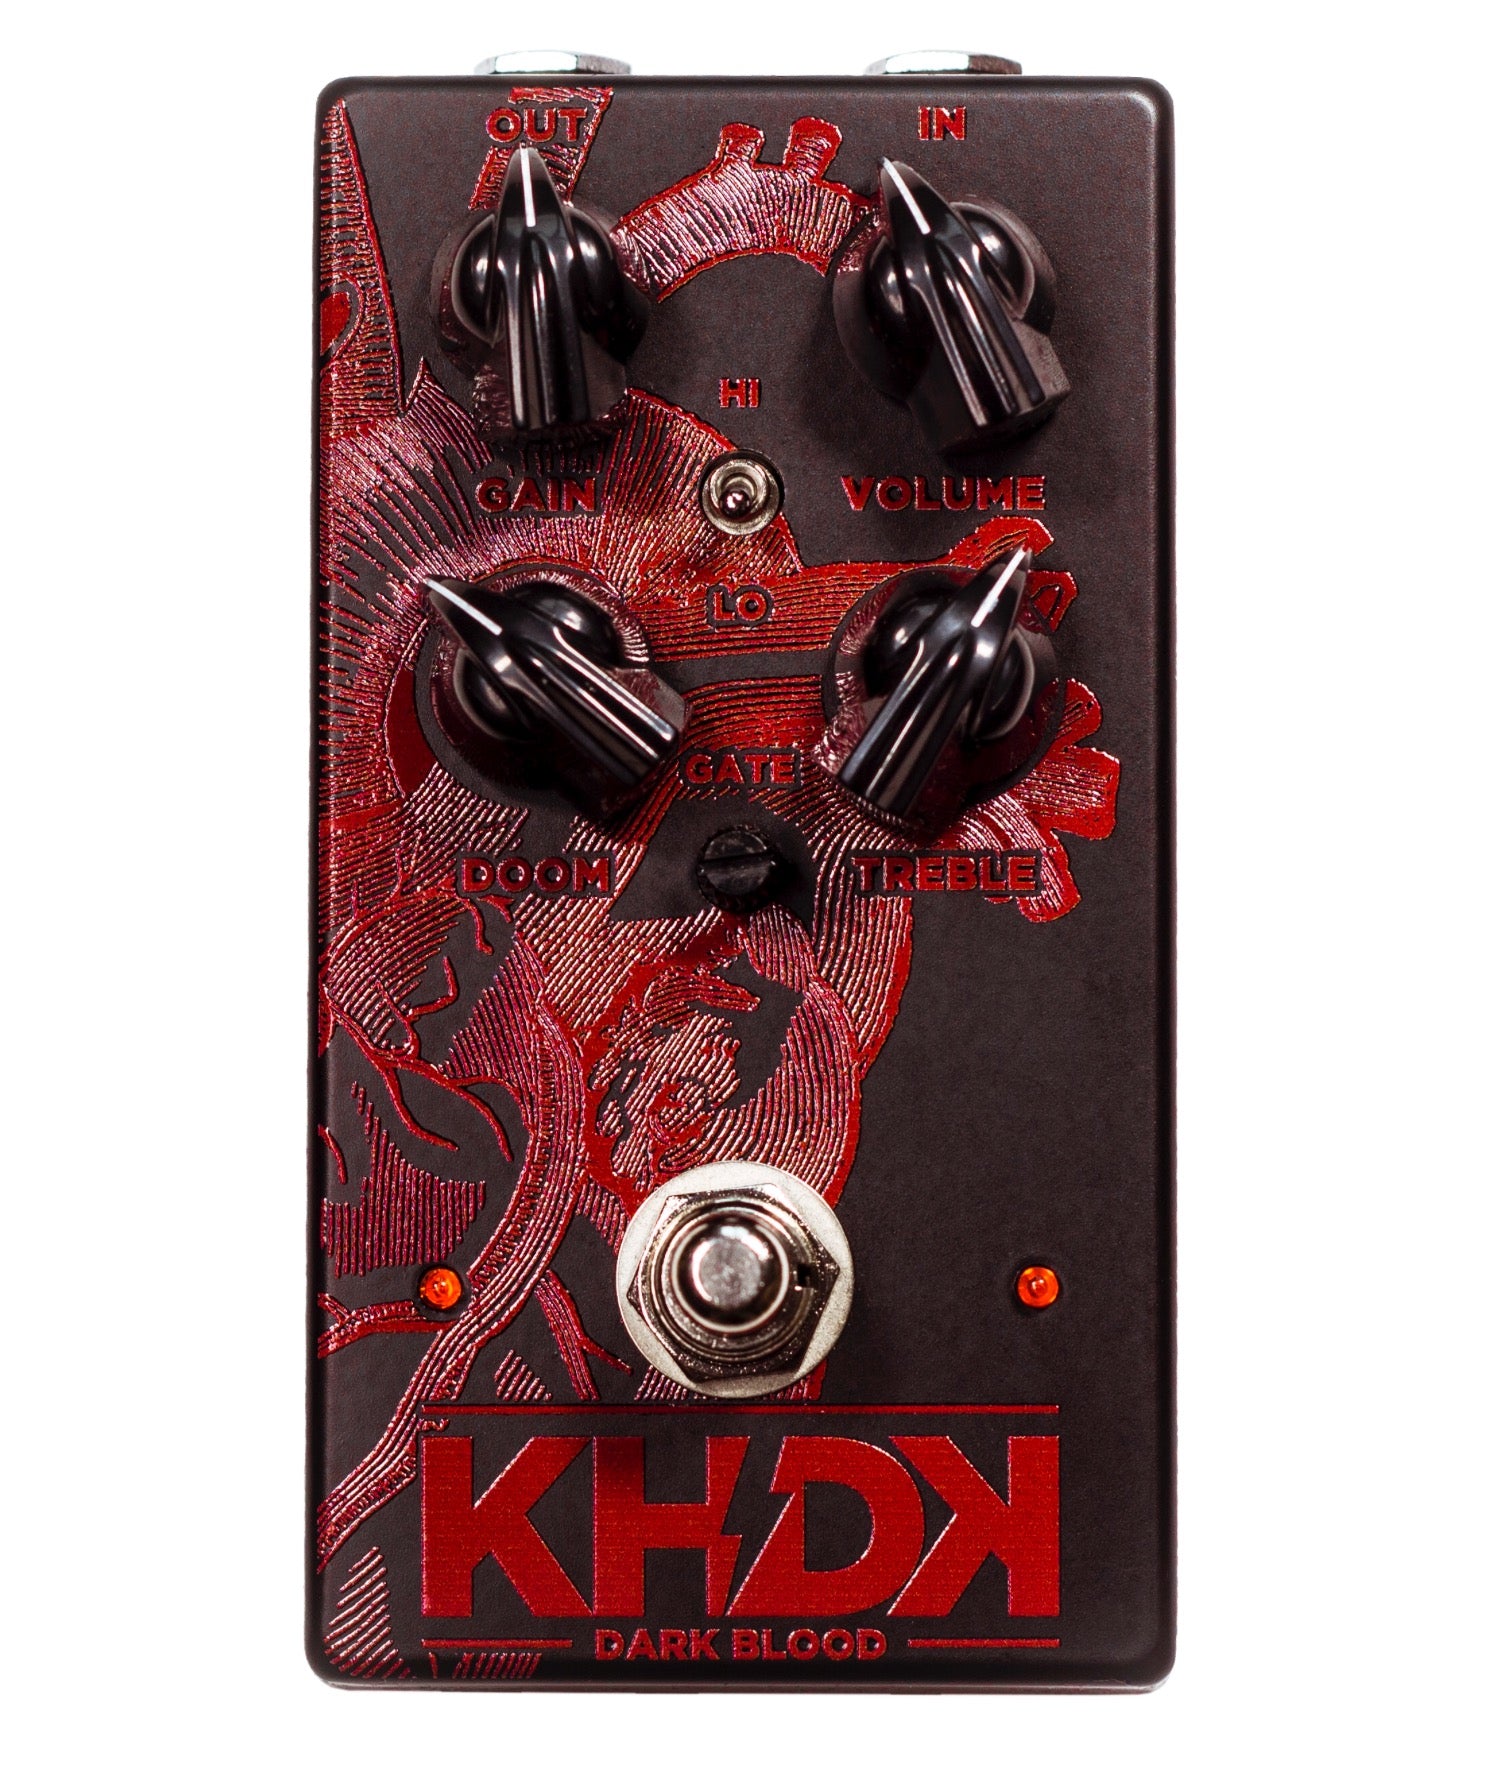 KHDK Dark Blood Distortion pedal. A heavy and crunchy distortion pedal by Kirk Hammet. 